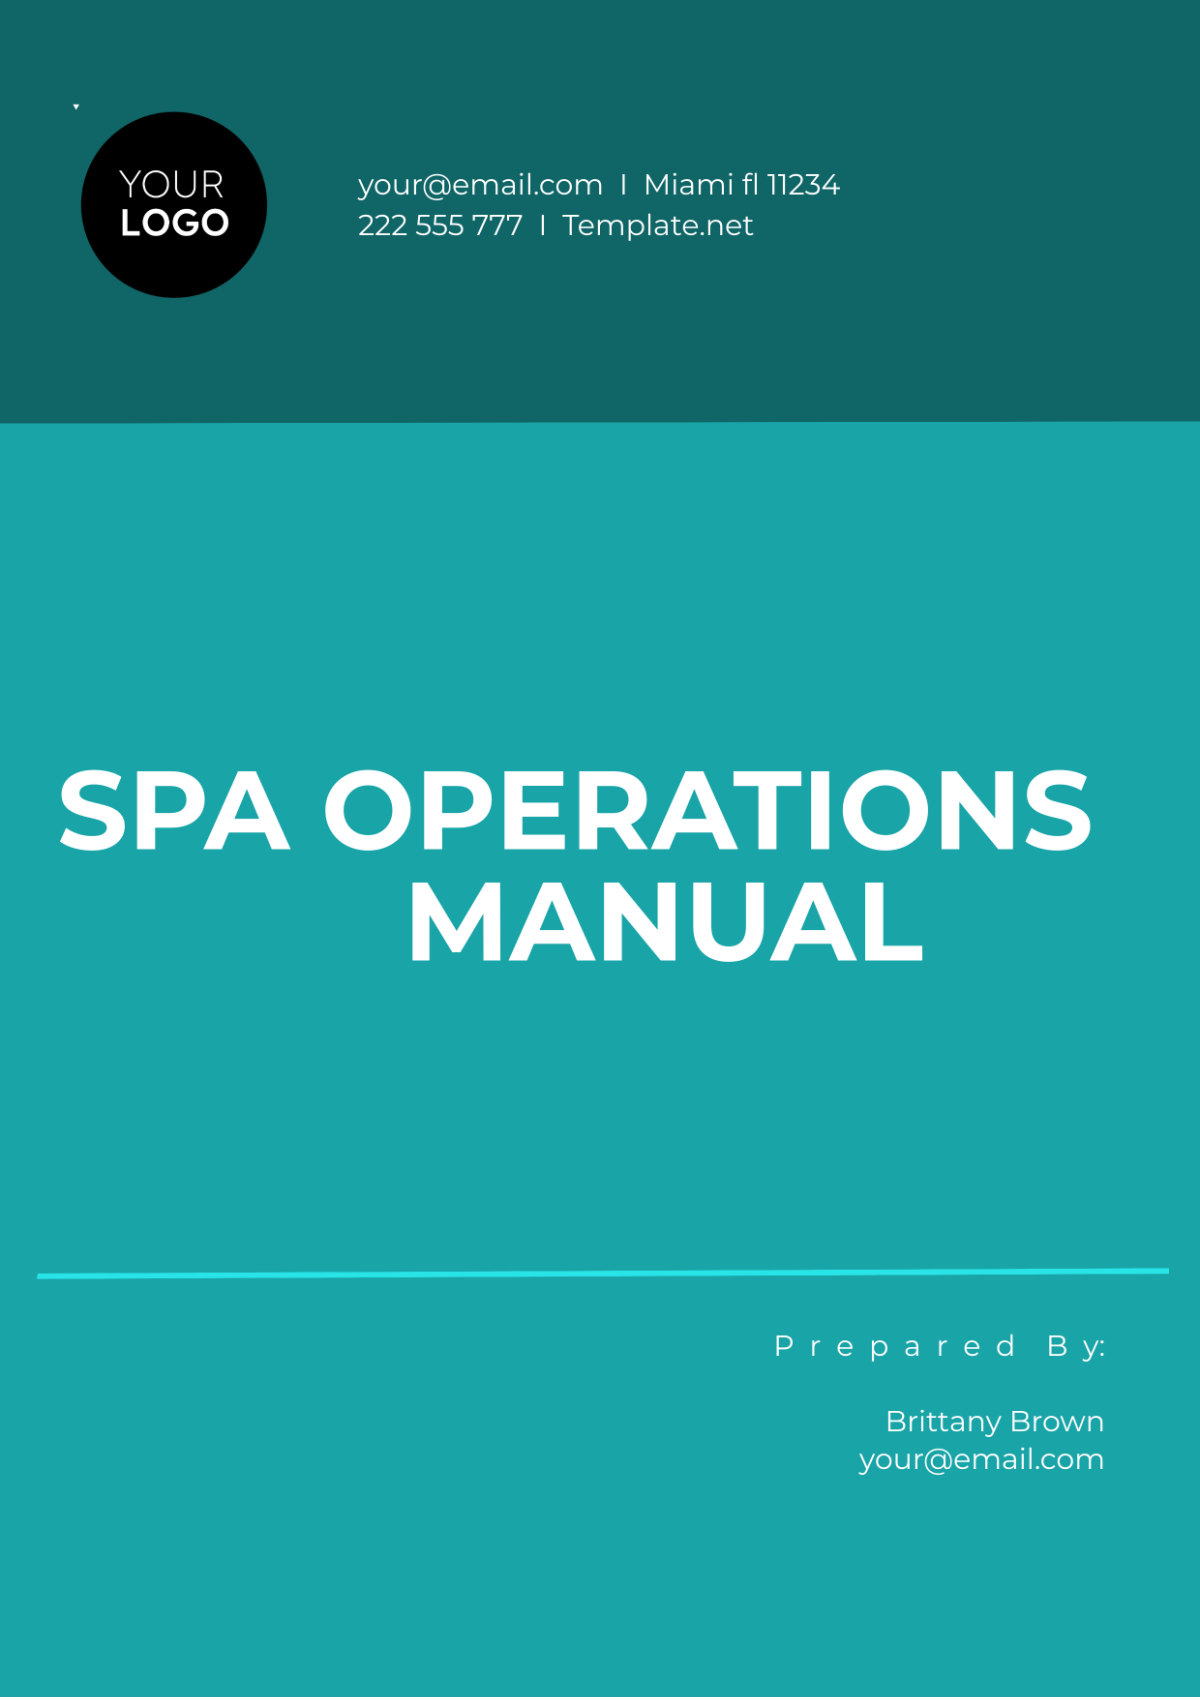 Spa Operations Manual Template